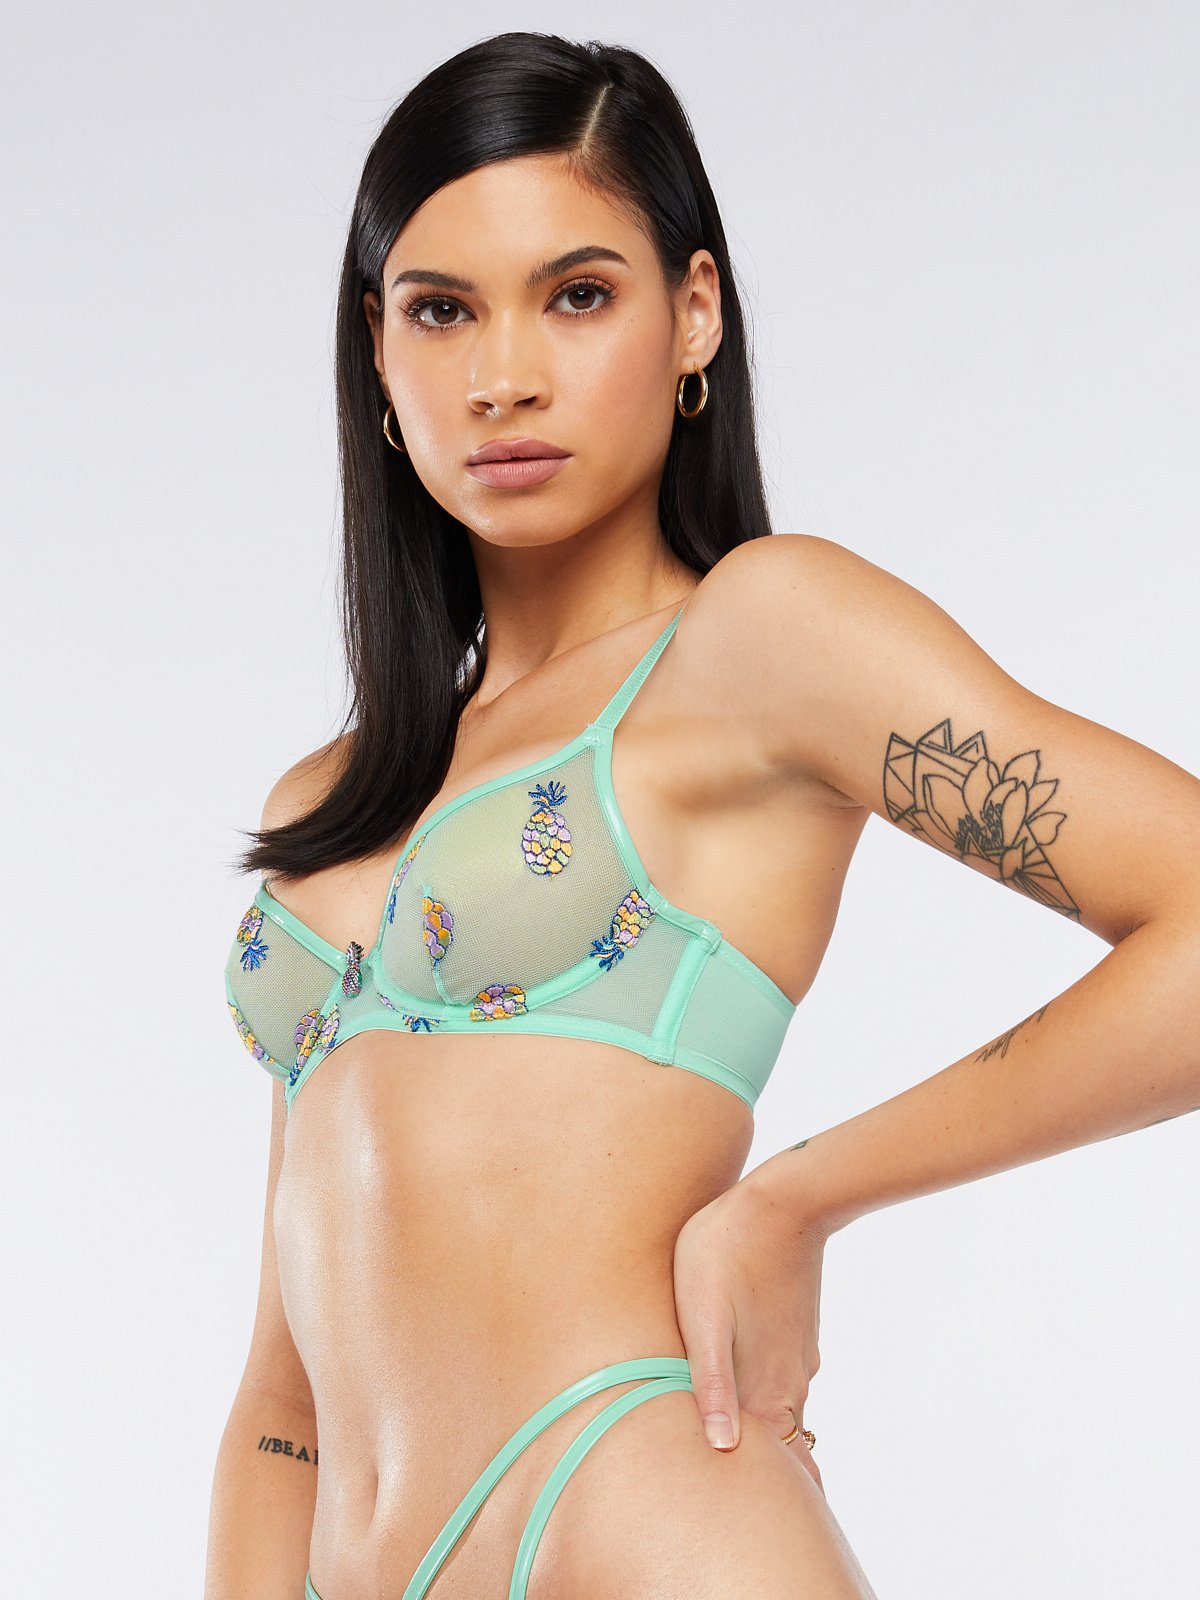 Bow Embroidered Tulle Bra With Overbust Bones By 'Cheers' By